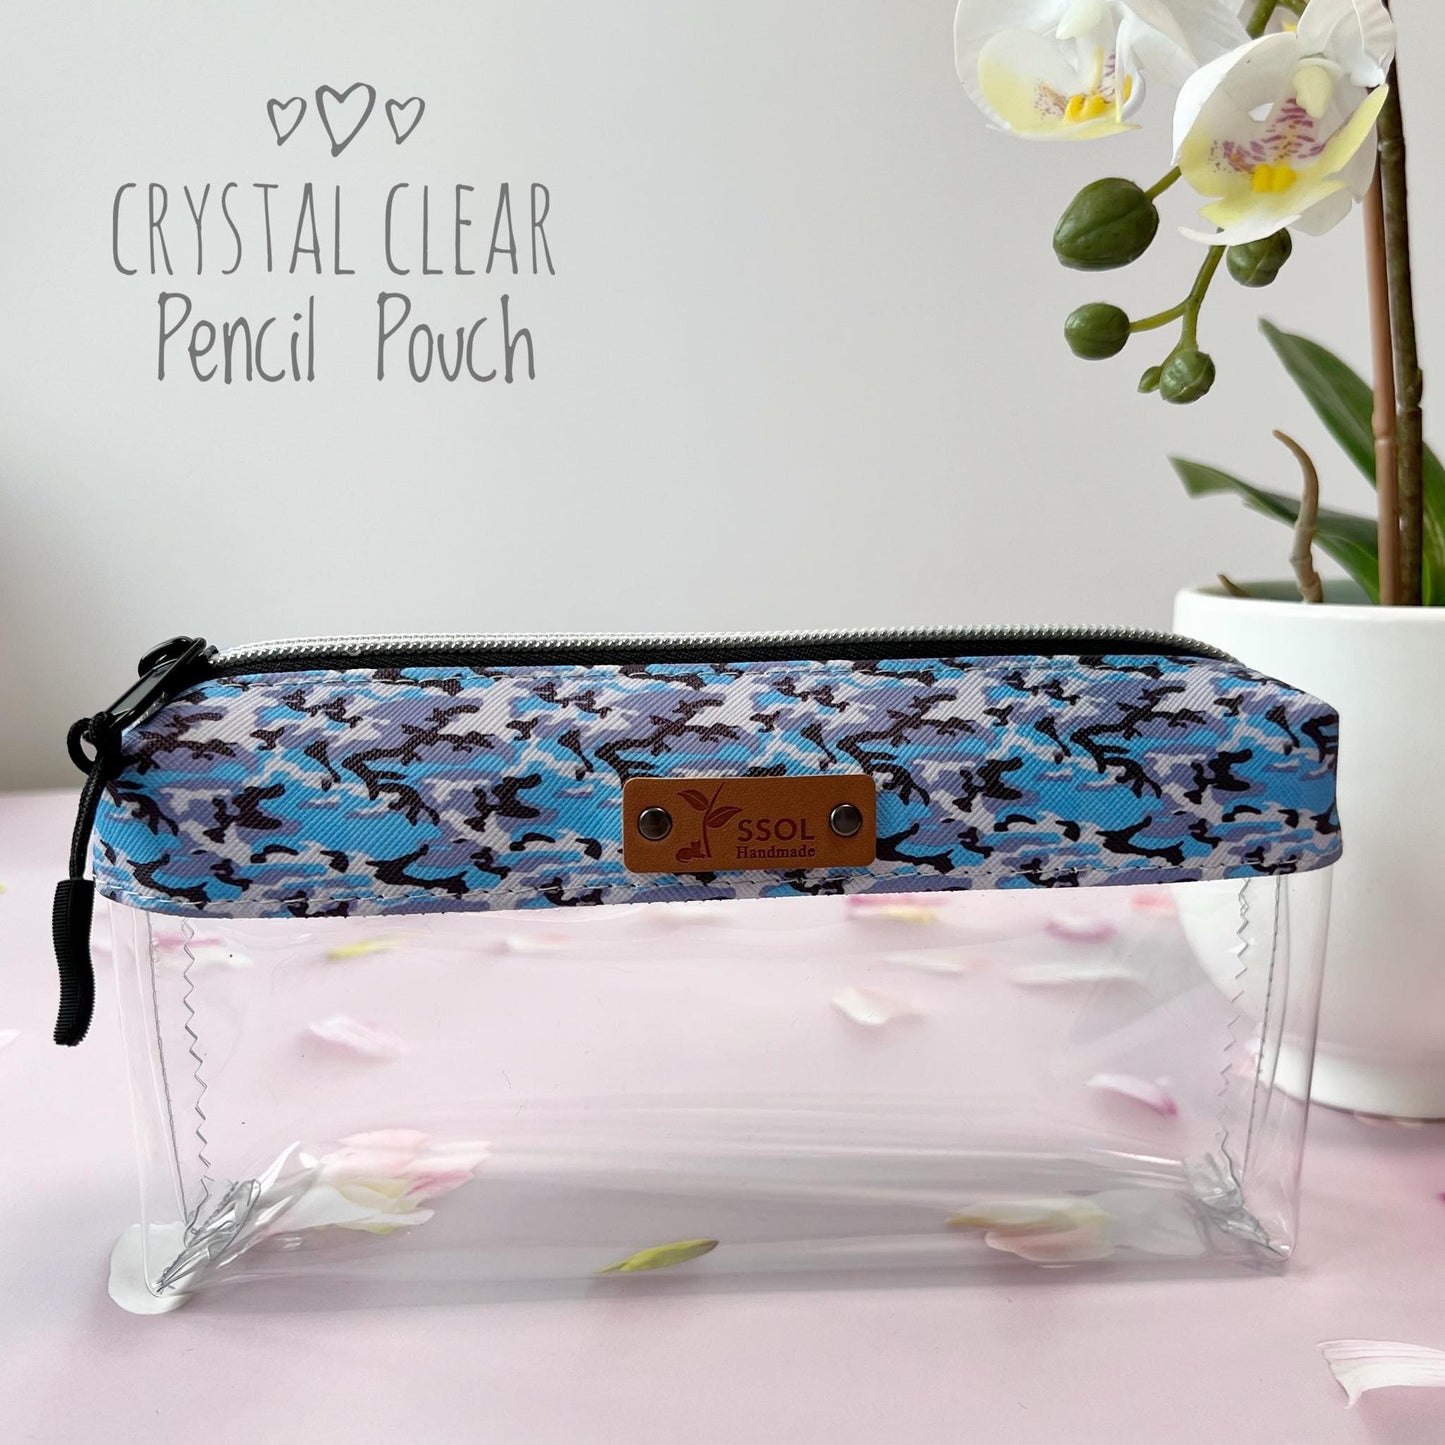 Crystal Clear Pencil Pouch - CCPP11